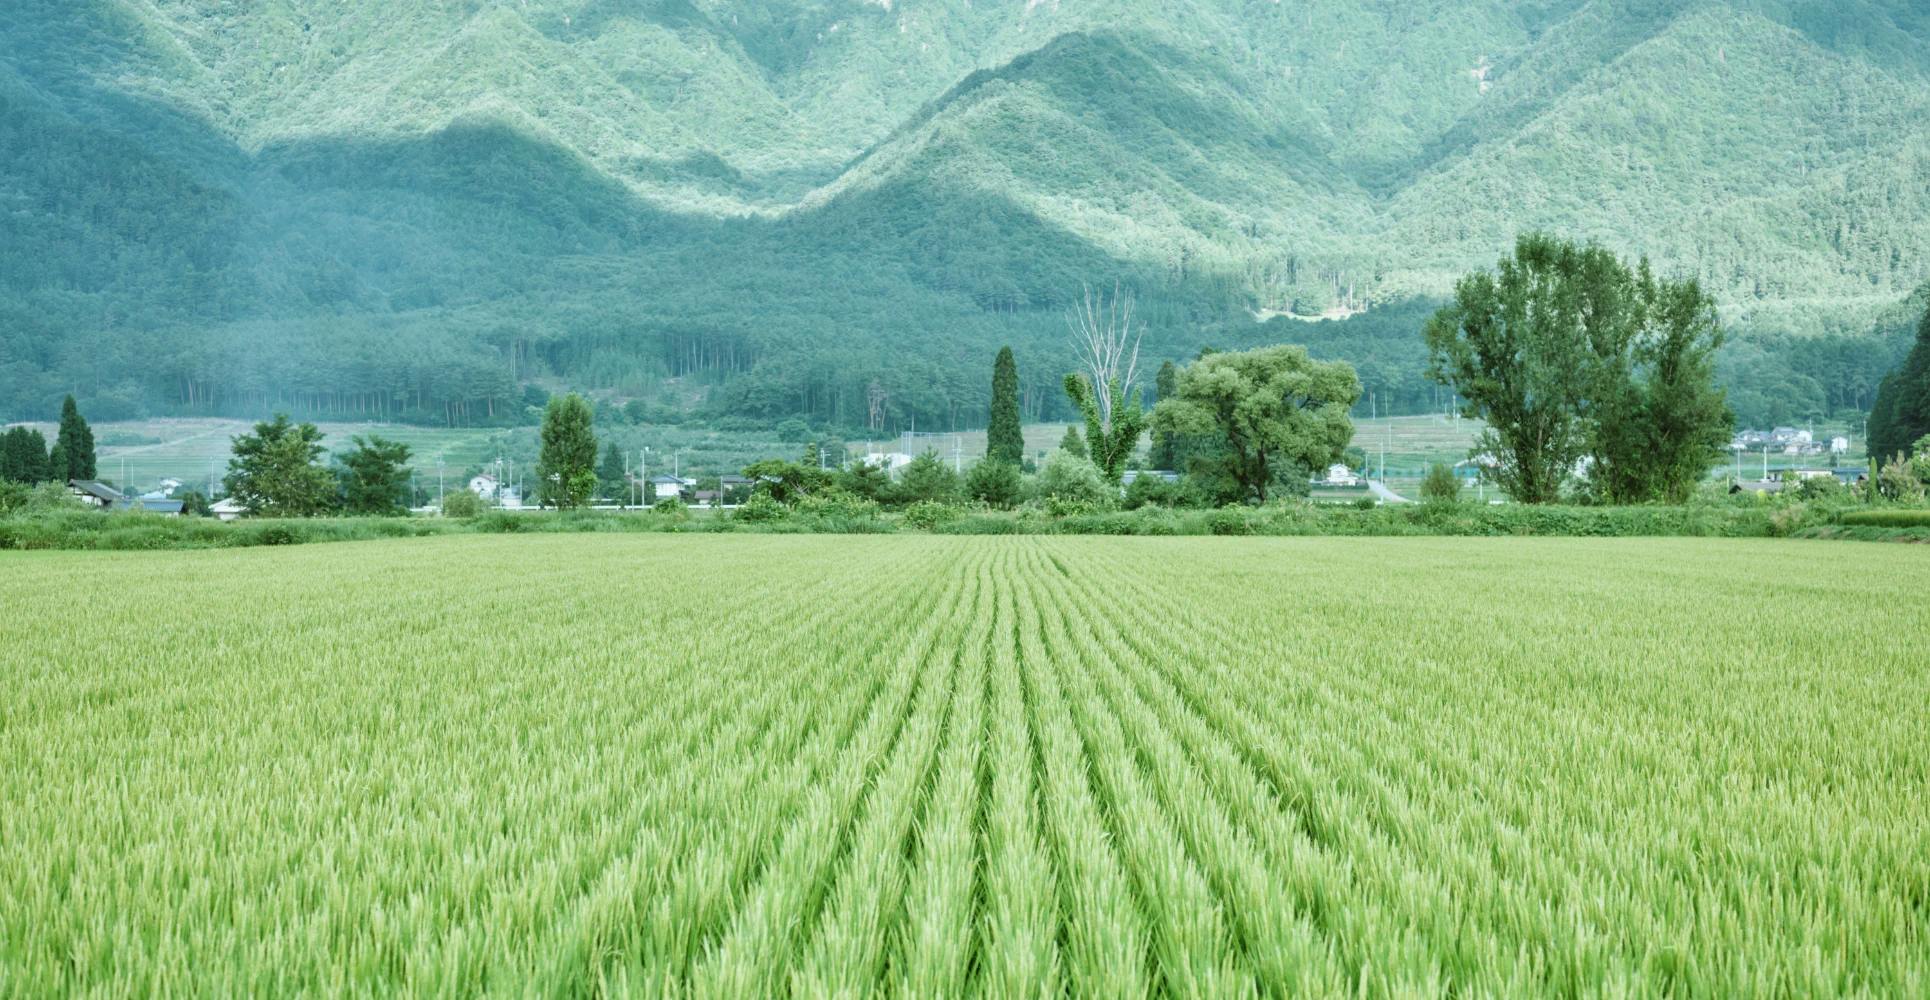 A picture of the rice fields and mountains of Nagano.